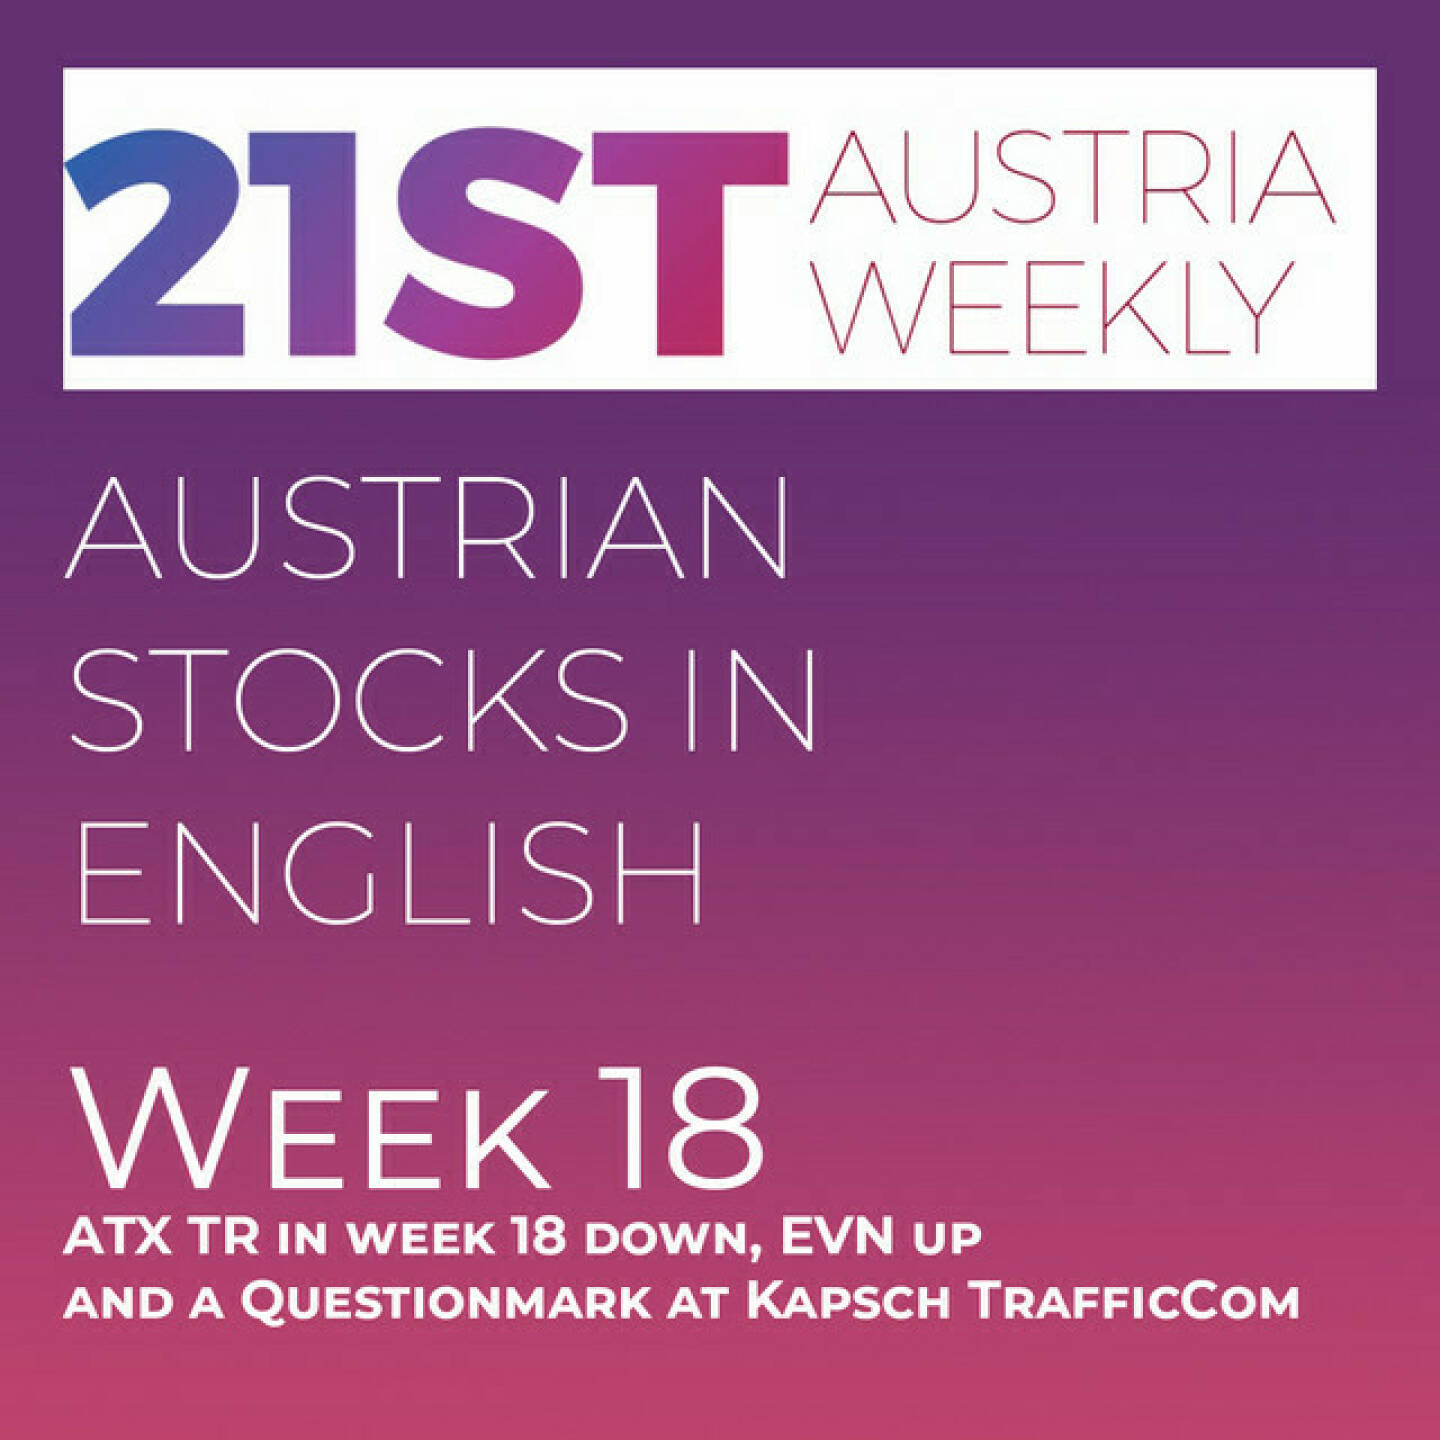 https://open.spotify.com/episode/6nRaRsDOd5cZBJyPCDIr1j
Austrian Stocks in English: ATX TR in week 18 down, EVN up and a Questionmark at Kapsch TrafficCom - <p>Welcome  to &#34;Austrian Stocks in English - presented by Palfinger&#34;, the english spoken weekly Summary for the Austrian Stock Market,  positioned every Sunday in the mostly german languaged Podcast &#34;Audio-CD.at Indie Podcasts&#34;- Wiener Börse, Sport Musik und Mehr“ .<br/><br/>The following script is based on our 21st Austria weekly and week 18 was a quiet week for ATX TR, which lost 0,76 percent to 6.888 points, year to date Topperformer EVN was also No 1. in week 18. Kapsch TrafficCom lost nearly 10 percent with strange News on Friday. News came from Frequentis, ams Osram, Lenzing, FACC, Kontron, Valneva, Wolftank, RHI Magnesita, RBI., spoken by the absolutely smart Alison.<br/><br/><a href=https://boerse-social.com/21staustria target=_blank>https://boerse-social.com/21staustria</a><br/><br/>Please rate my Podcast on Apple Podcasts (or Spotify): <a href=https://podcasts.apple.com/at/podcast/audio-cd-at-indie-podcasts-wiener-boerse-sport-musik-und-mehr/id1484919130 target=_blank>https://podcasts.apple.com/at/podcast/audio-cd-at-indie-podcasts-wiener-boerse-sport-musik-und-mehr/id1484919130</a> .And please spread the word : <a href=https://www.boerse-social.com/21staustria target=_blank>https://www.boerse-social.com/21staustria</a> - the address to subscribe to the weekly summary as a PDF.</p>